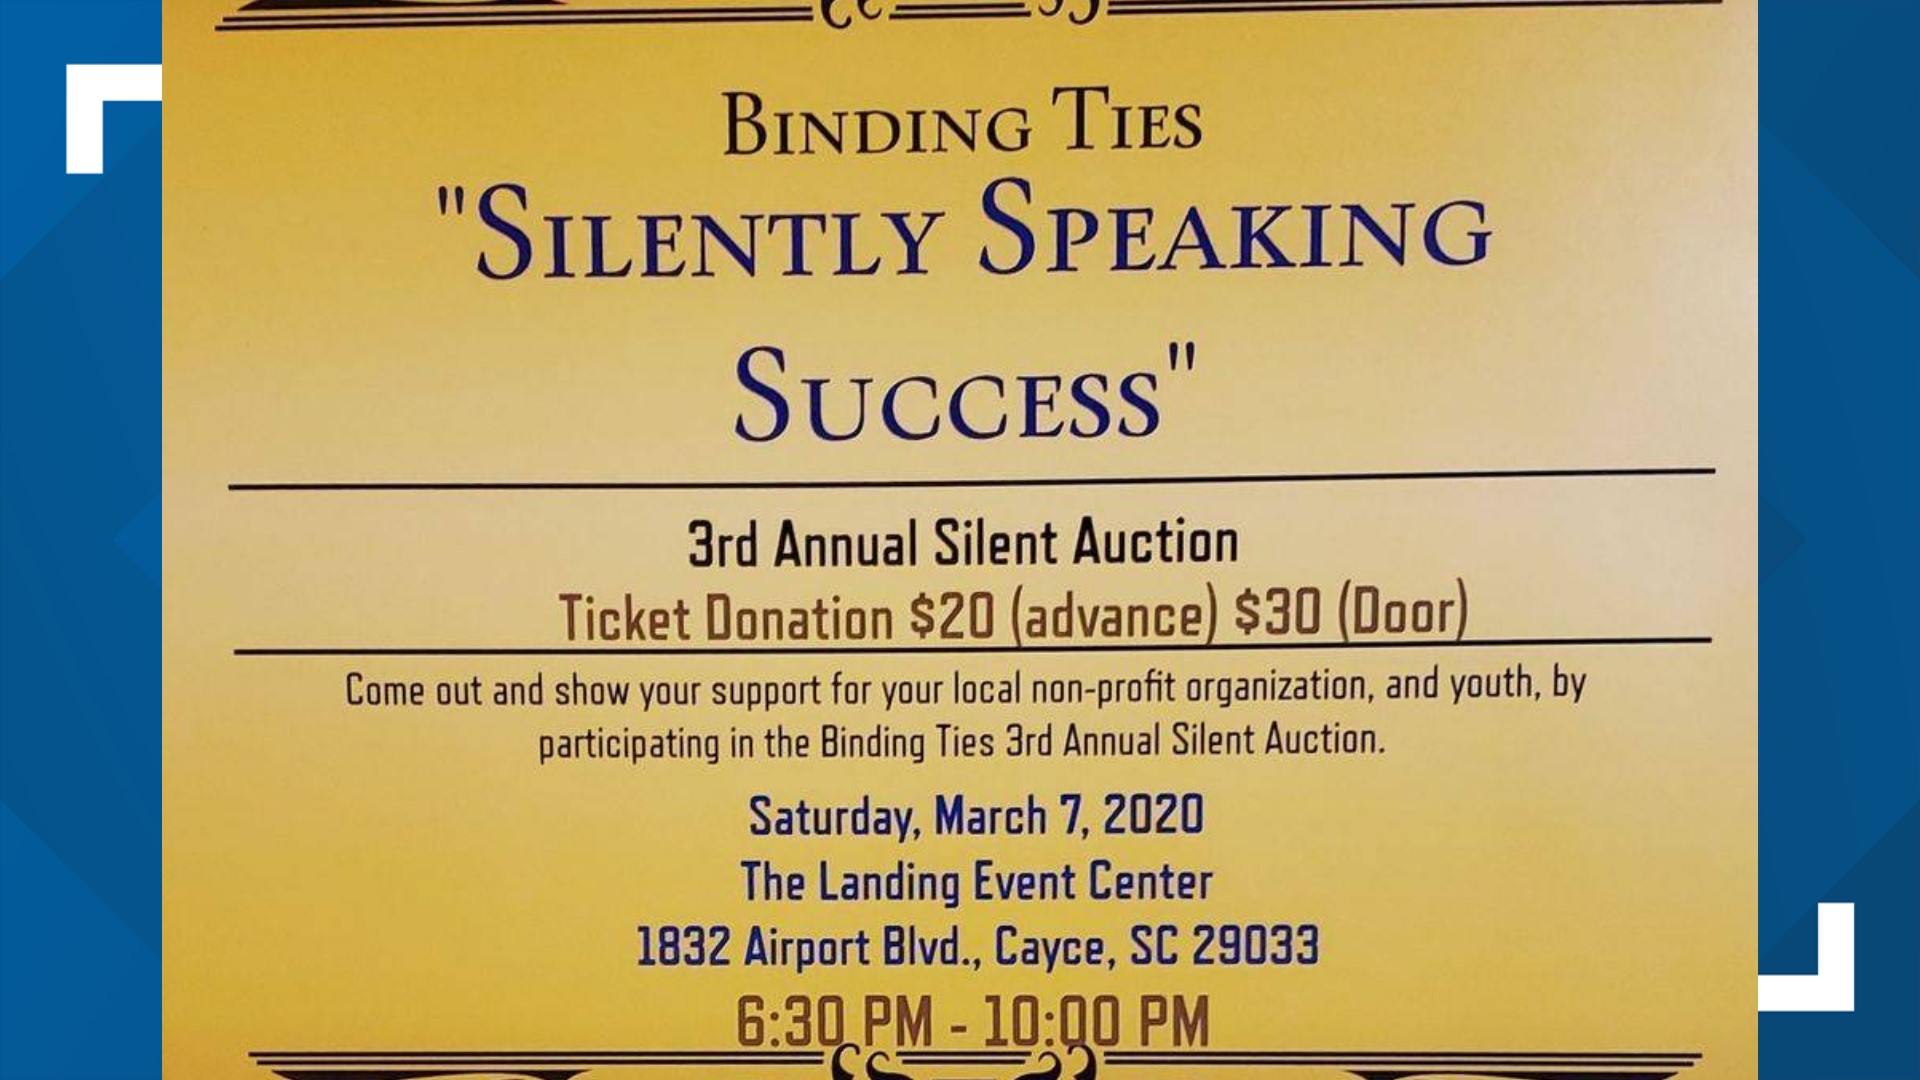 3rd Annual Silent Auction to benefit Binding Ties